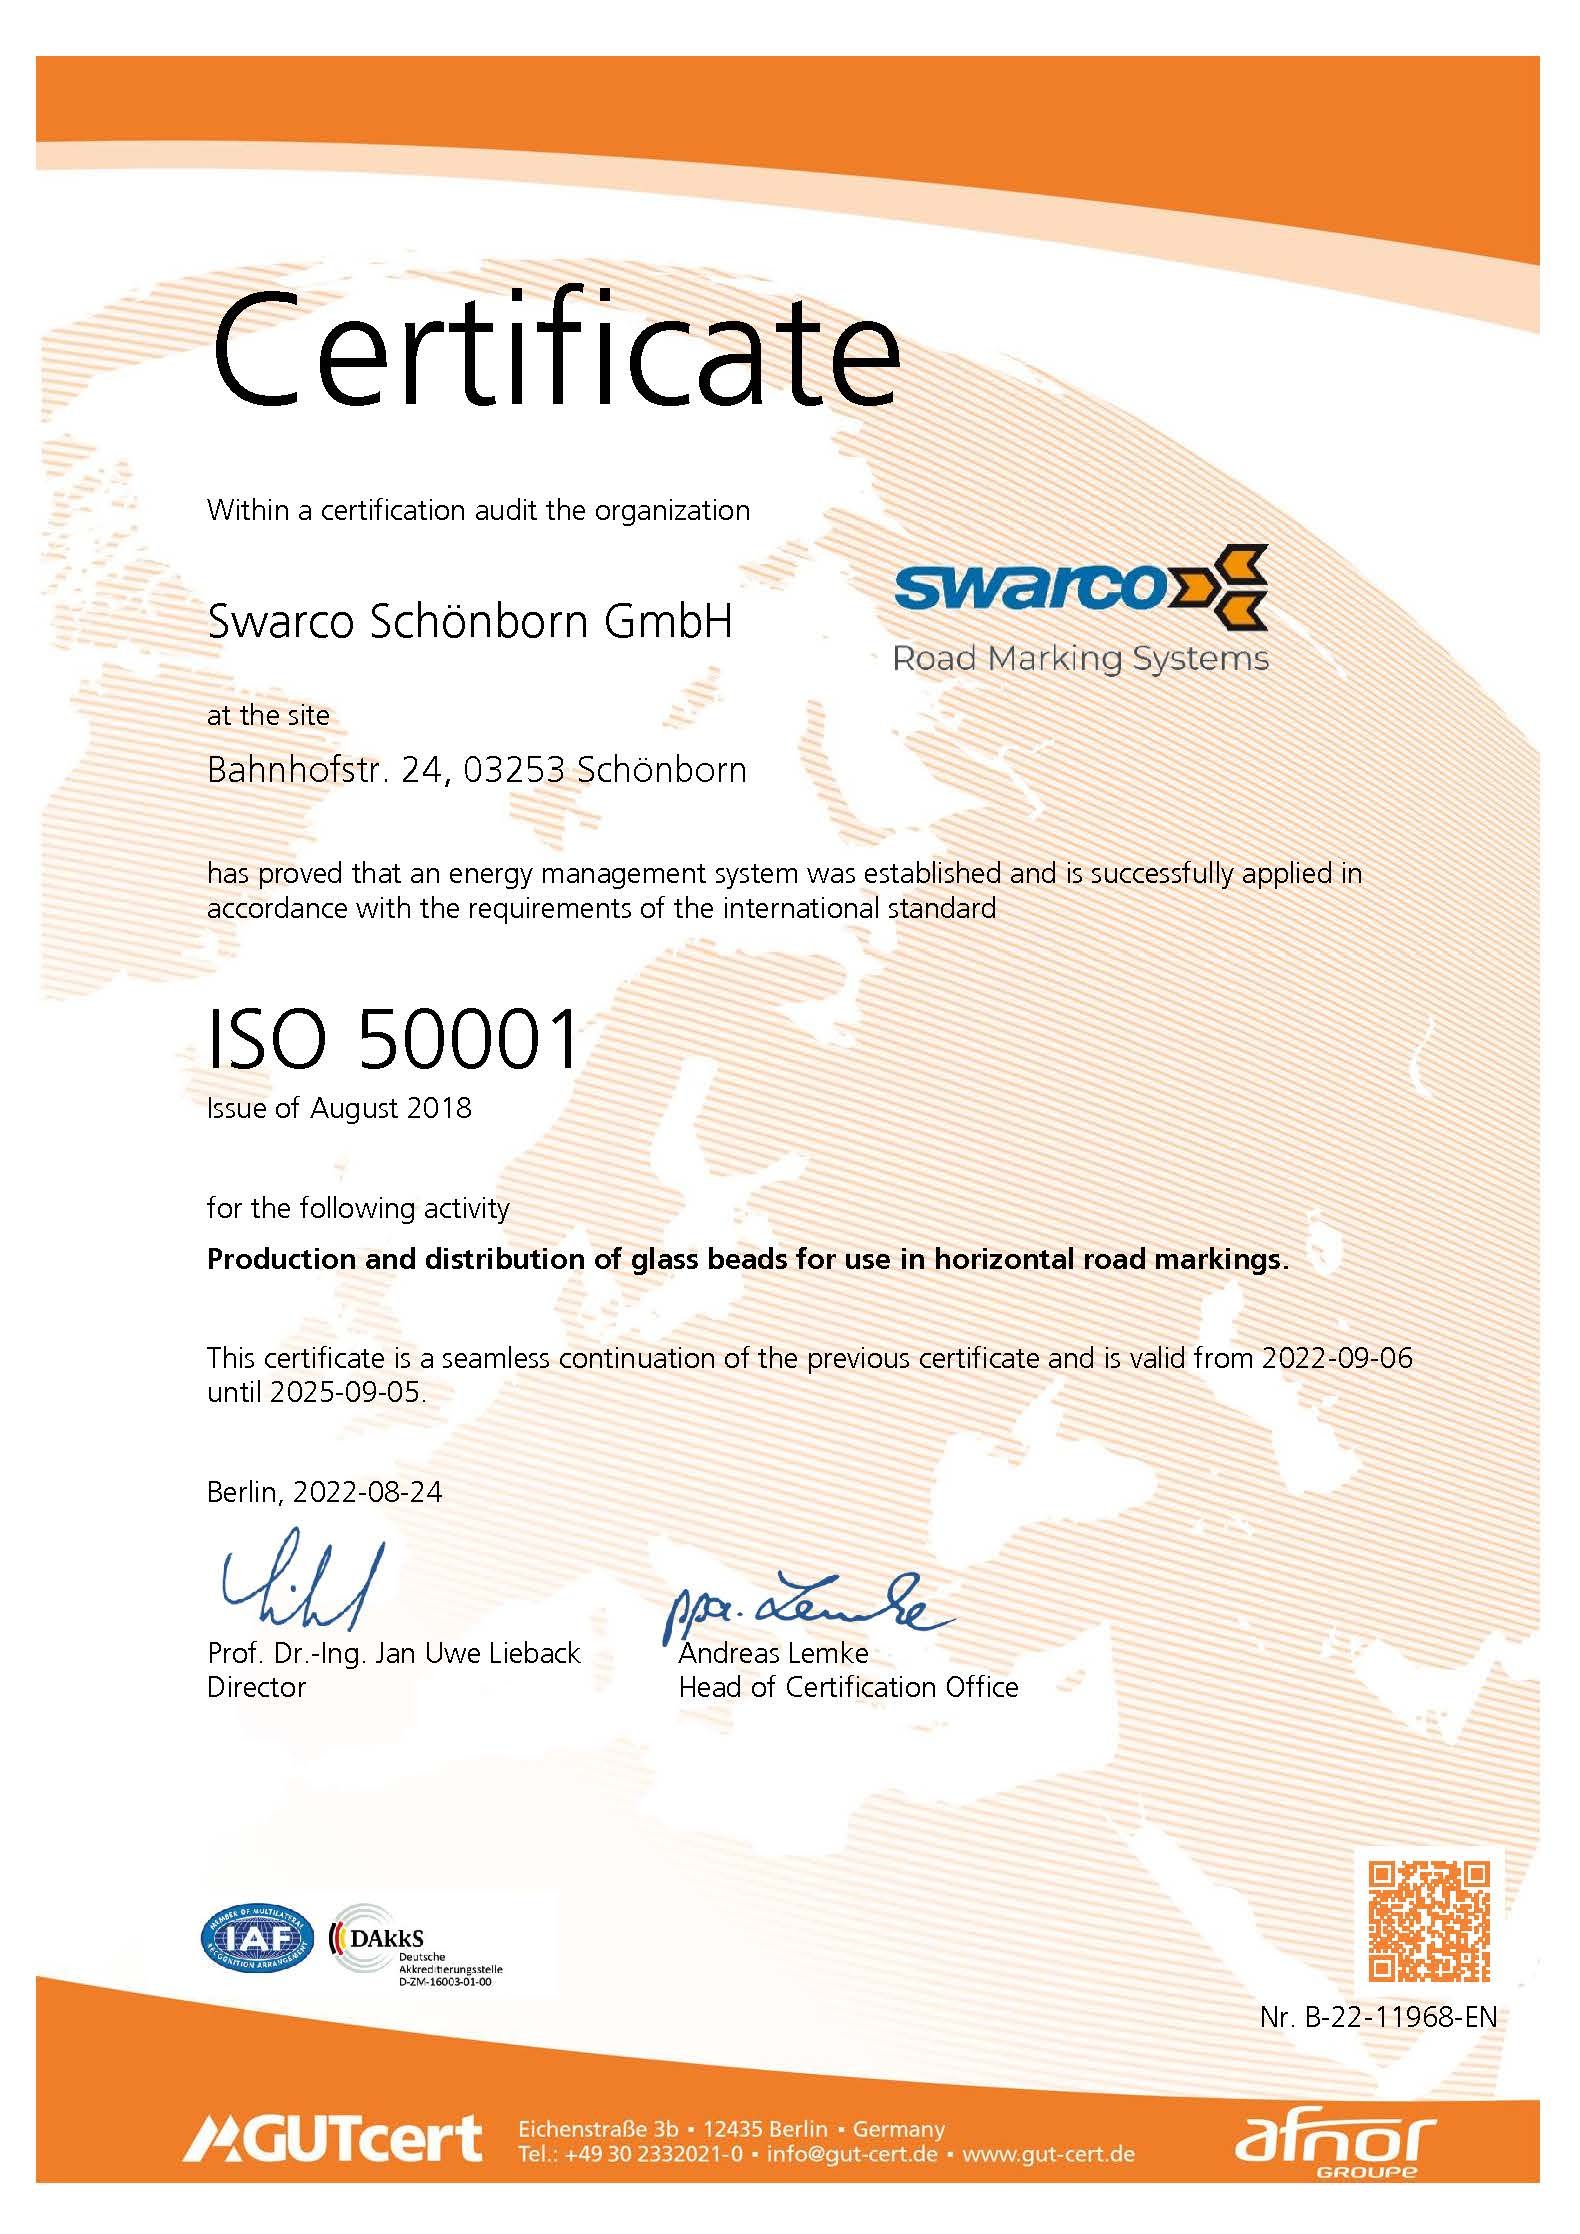 ISO 5001